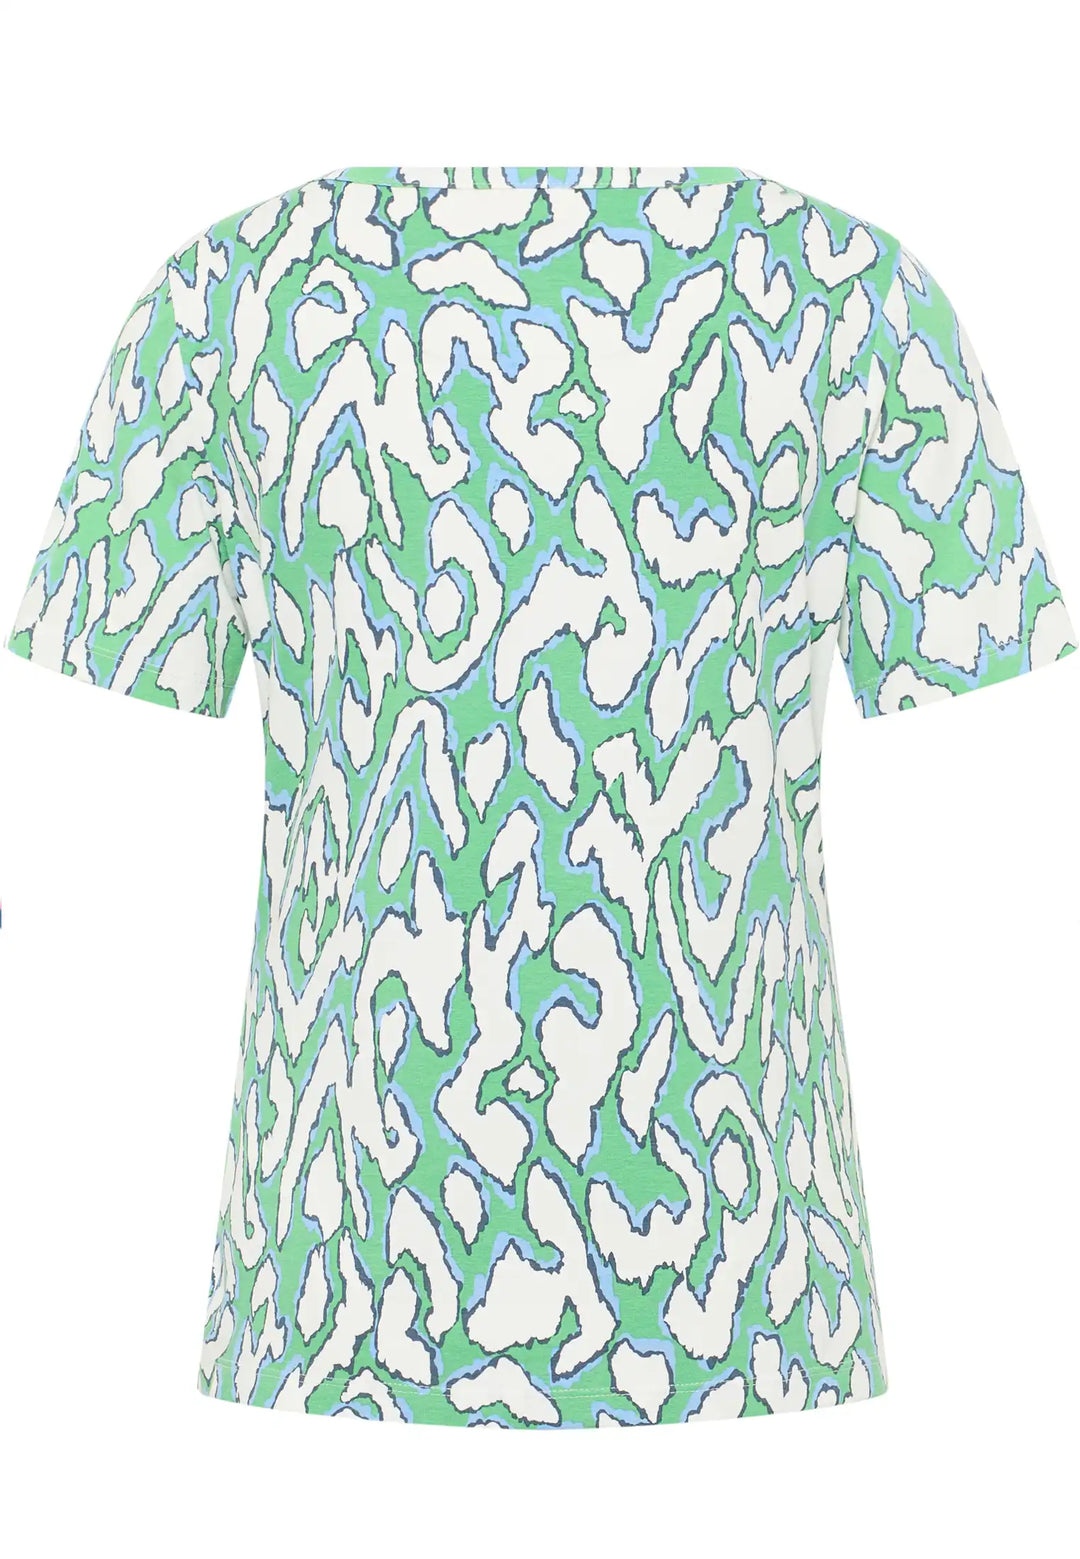 Back view of a vibrant green and blue abstract coral reef print on a short-sleeved top with a round neckline, embodying a lively and comfortable style, style 57610042-650